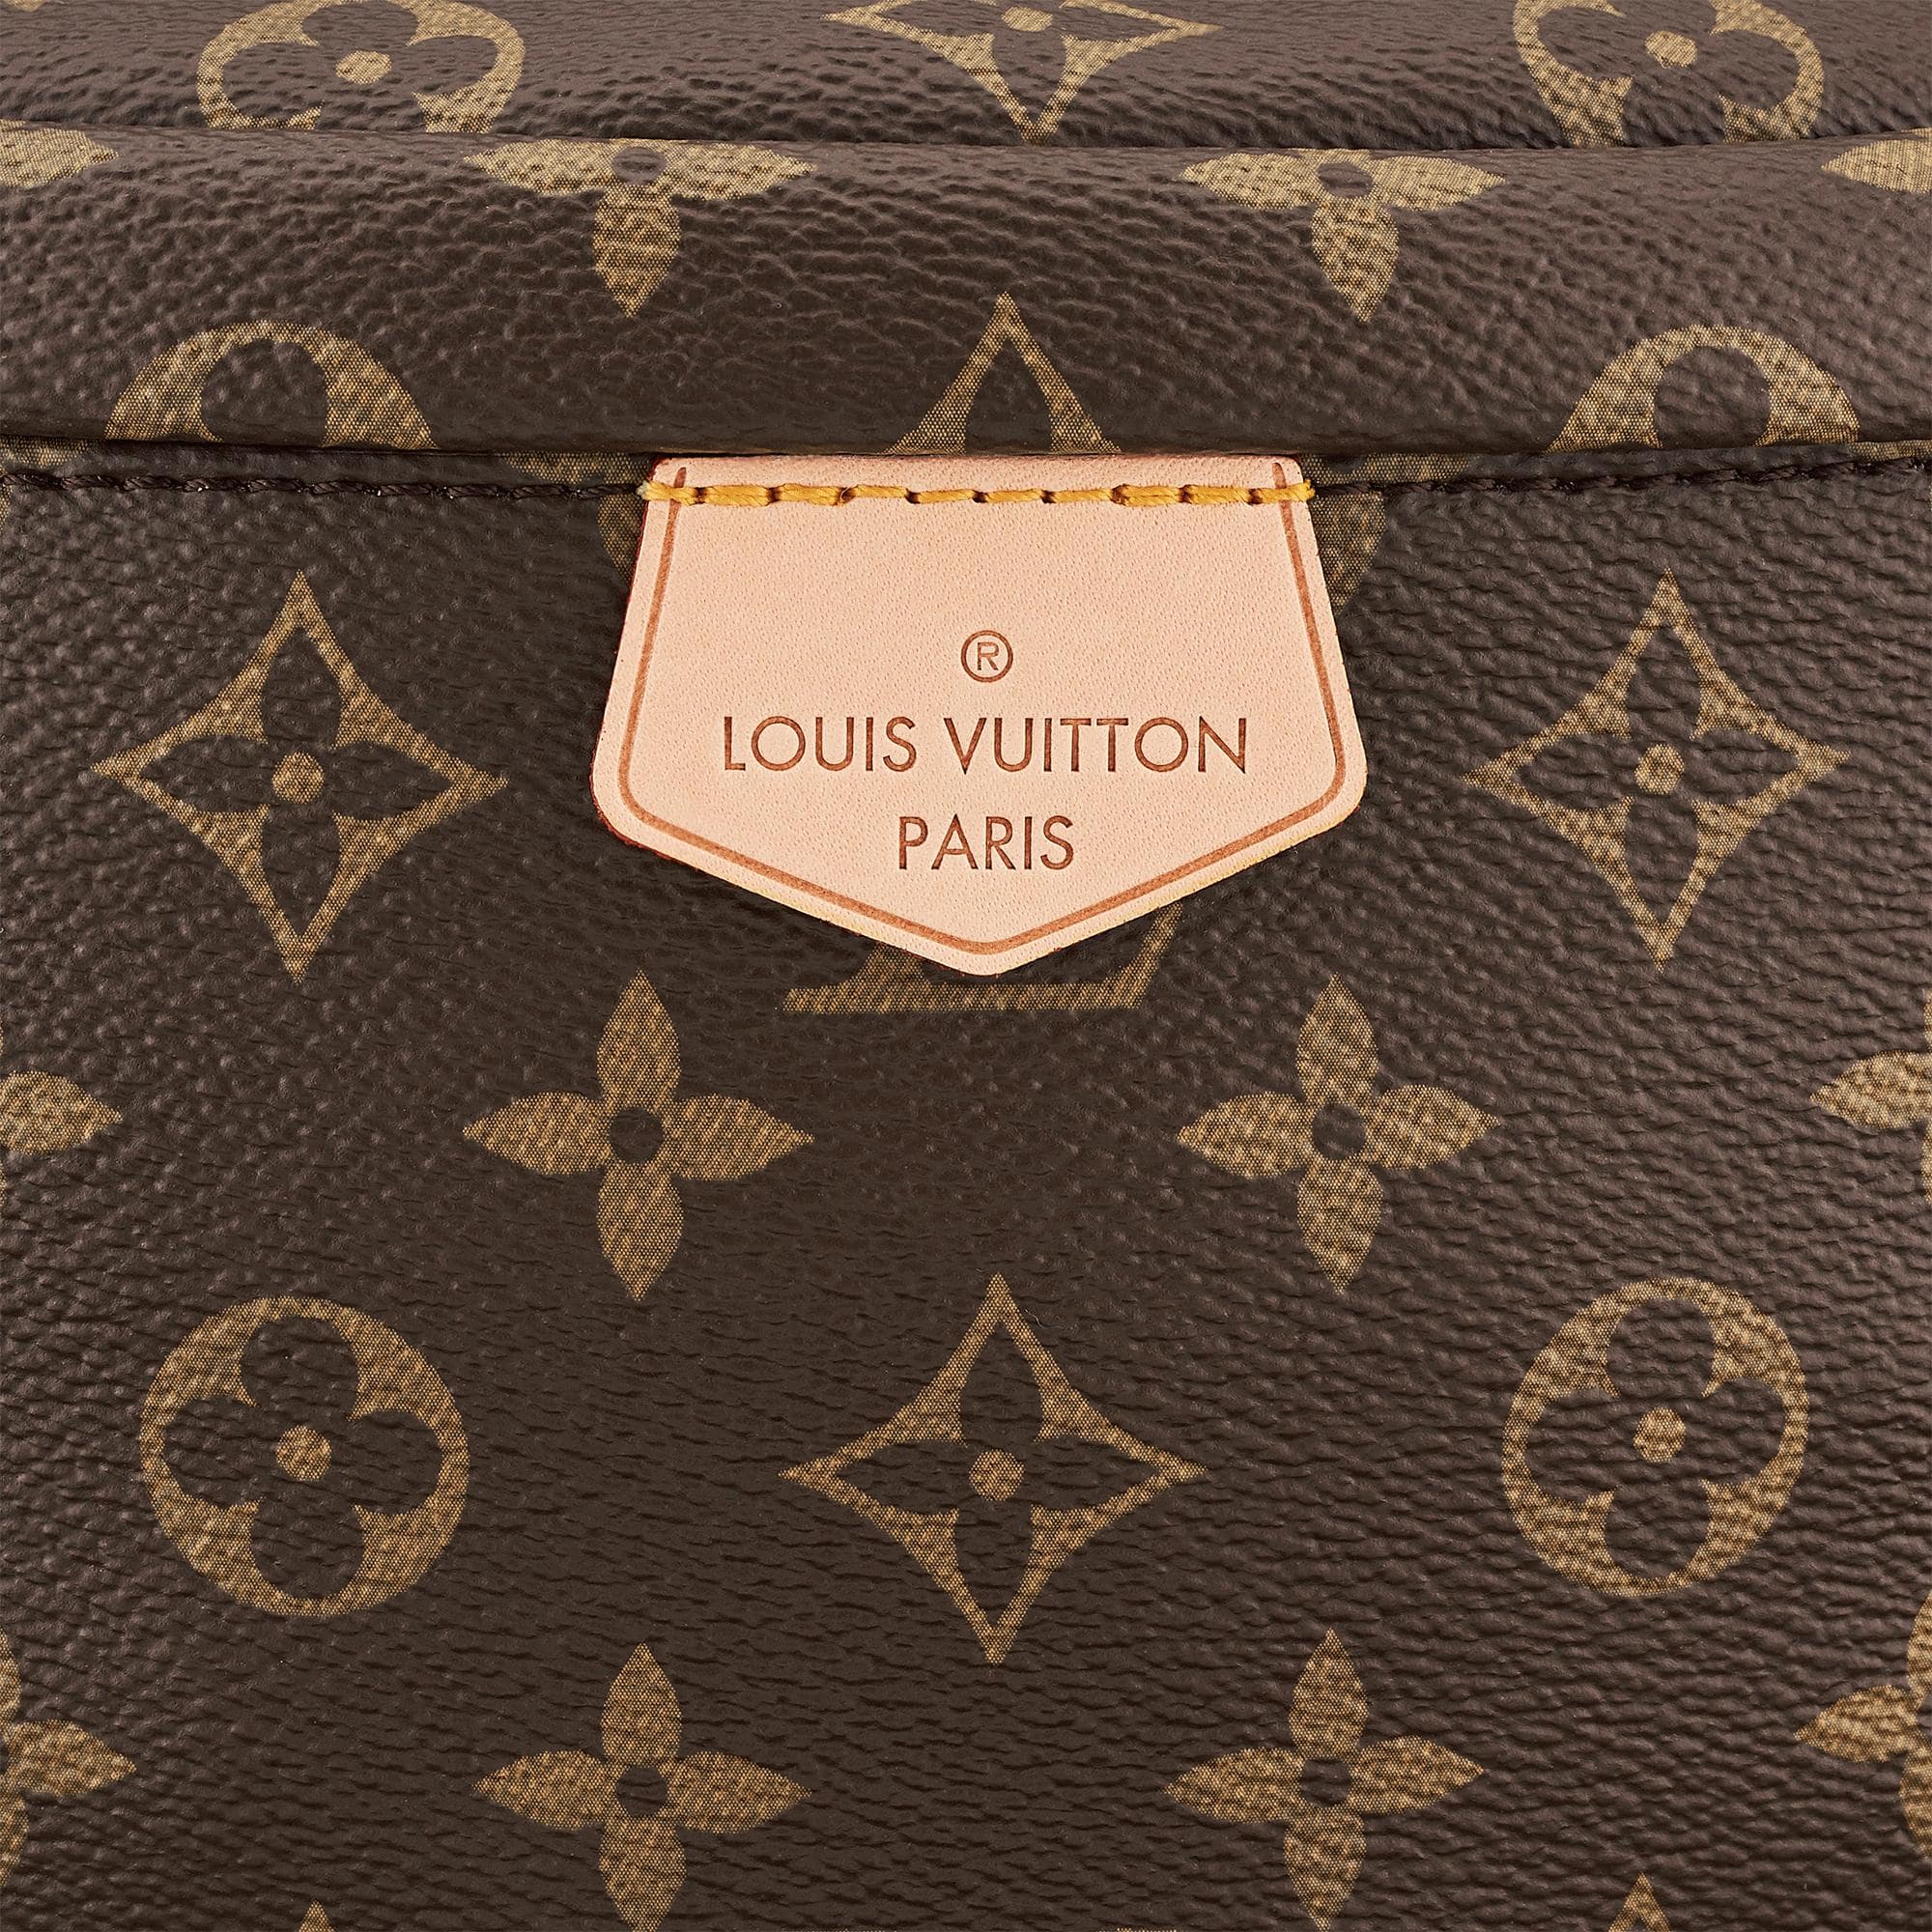 brand-minds-louis-vuitton-the-story-min